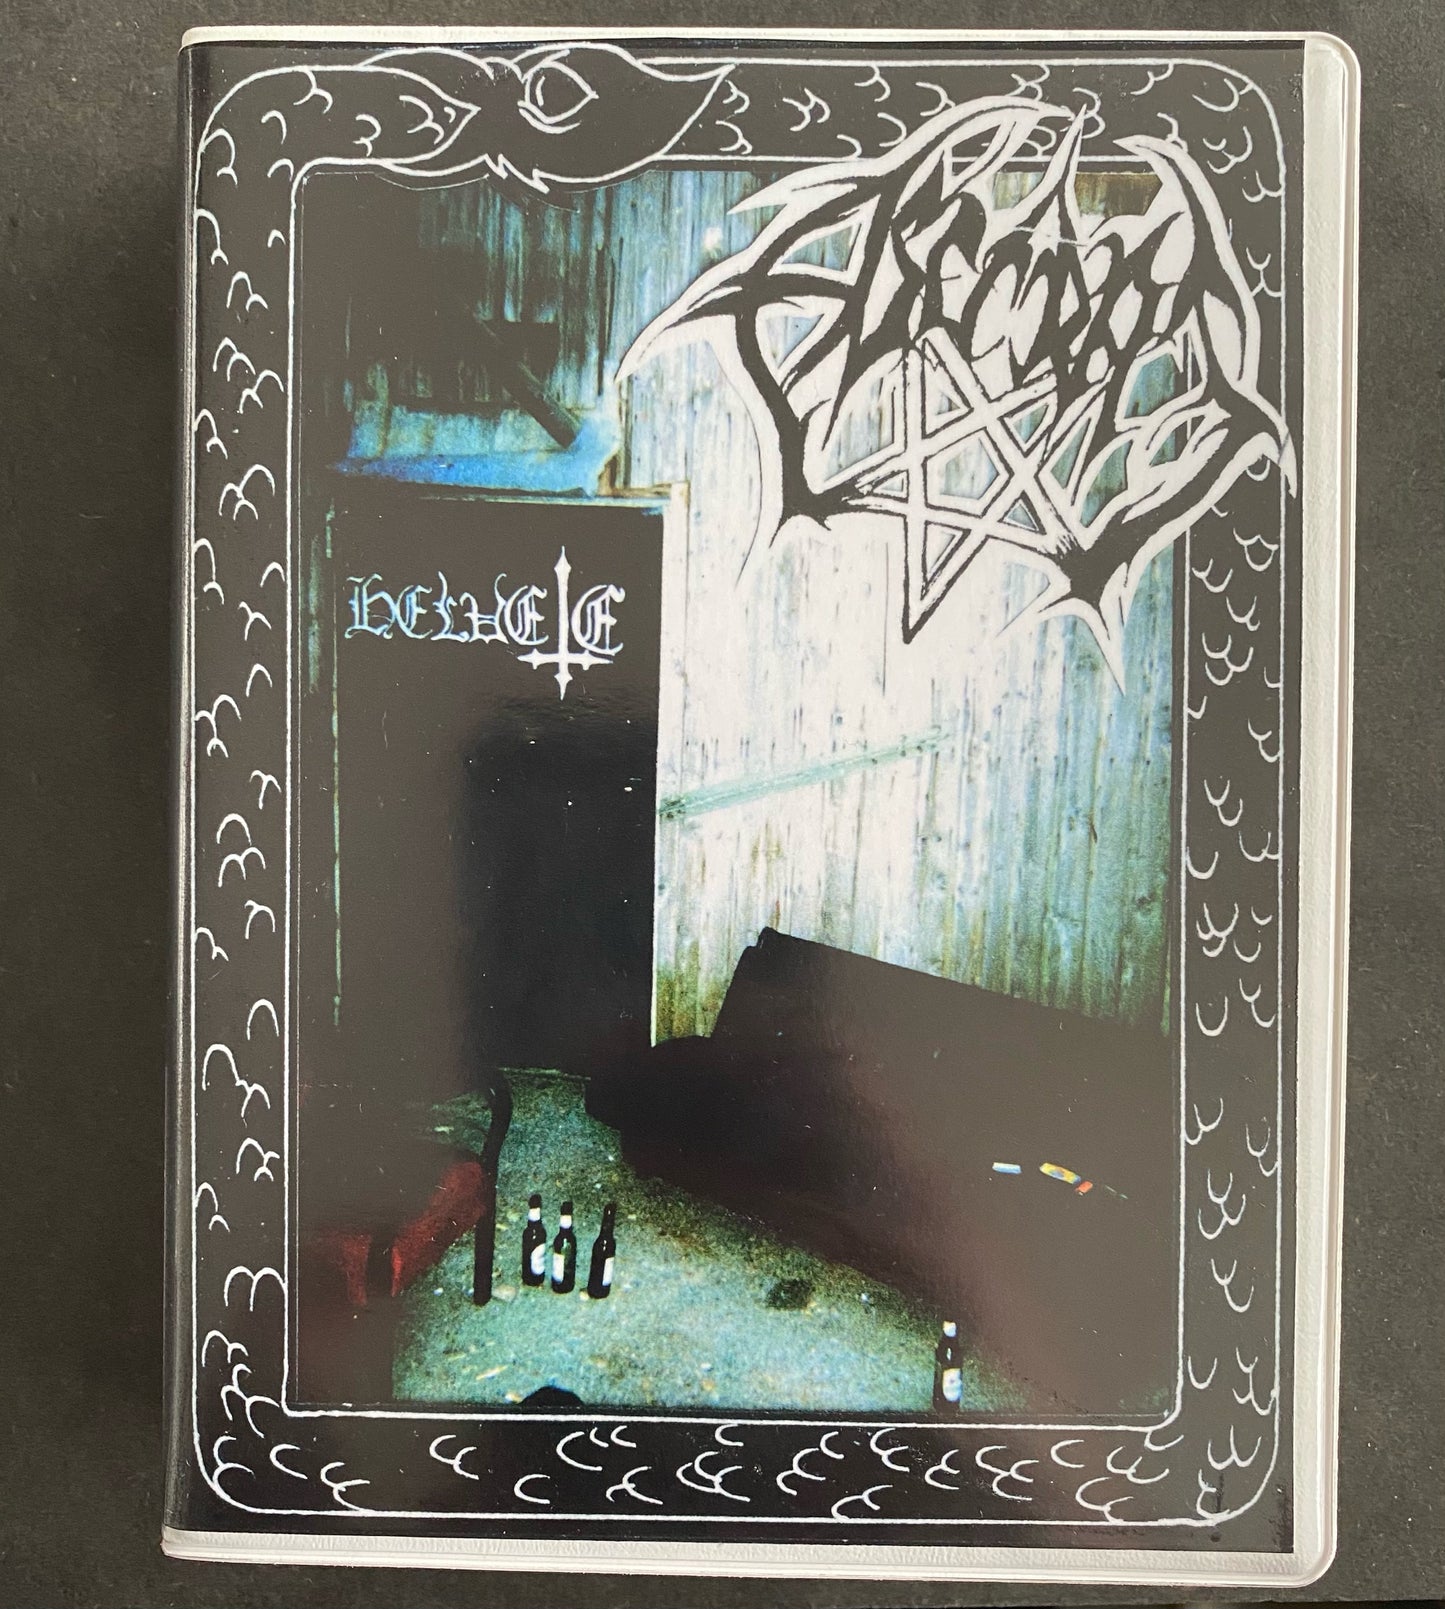 Asuras – Collected Works Double Tape Box